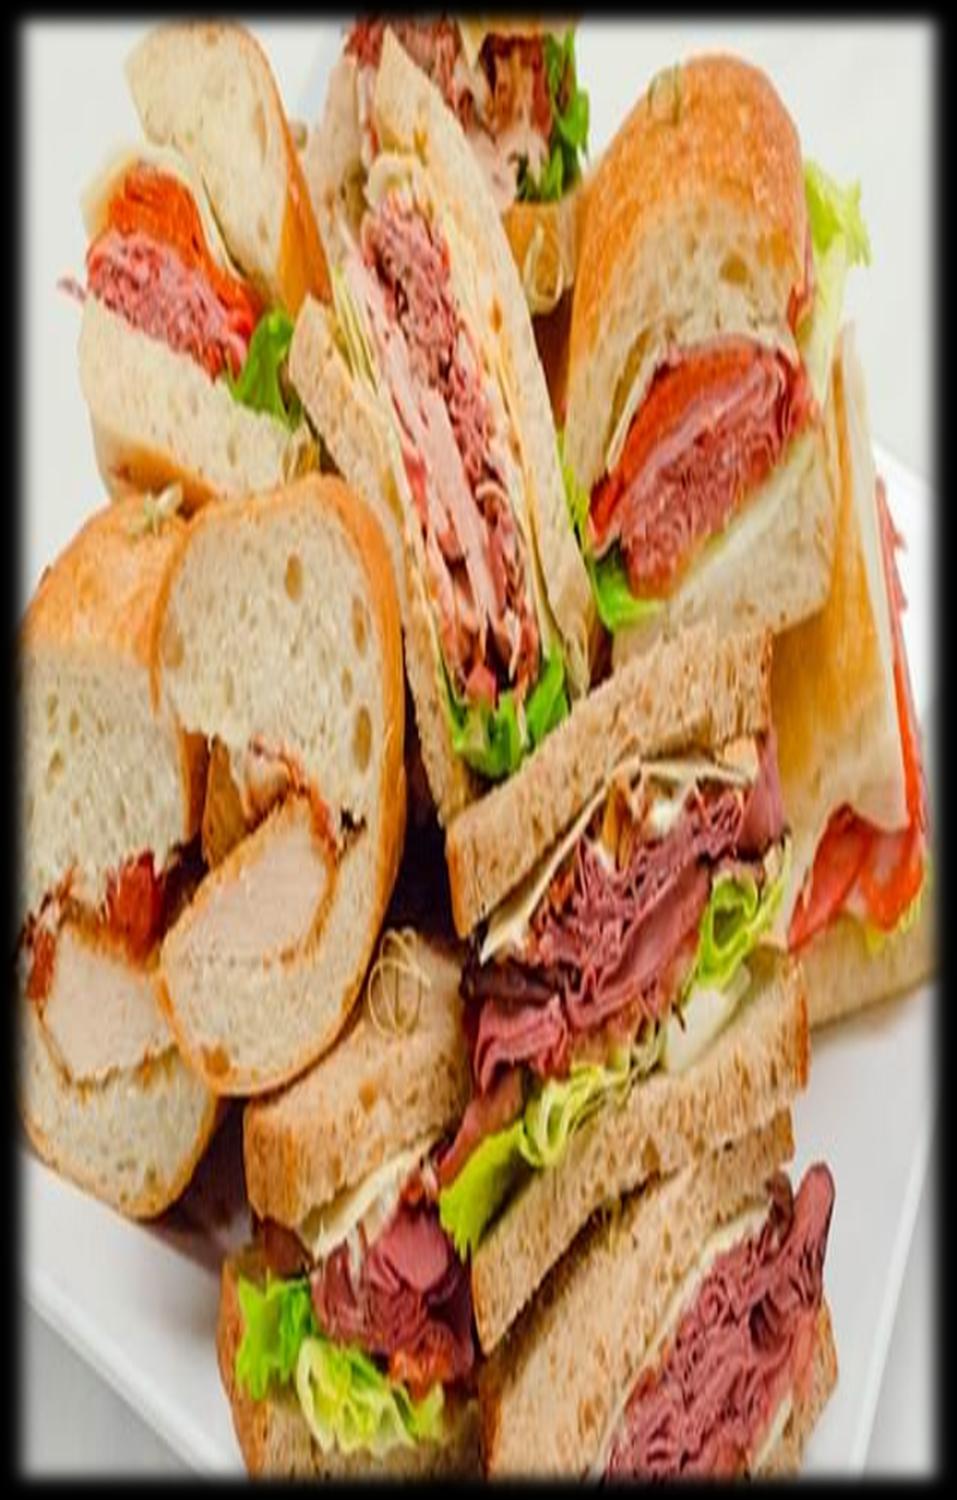 Buffet Menus Lunch Grilled Buffet Lunch Garden & Pasta Salad Choice of Two: Hamburgers, Chicken Breast, Italian Sausage, or Hotdog Rolls All Condiments Cookies Soft Drinks Station $16.